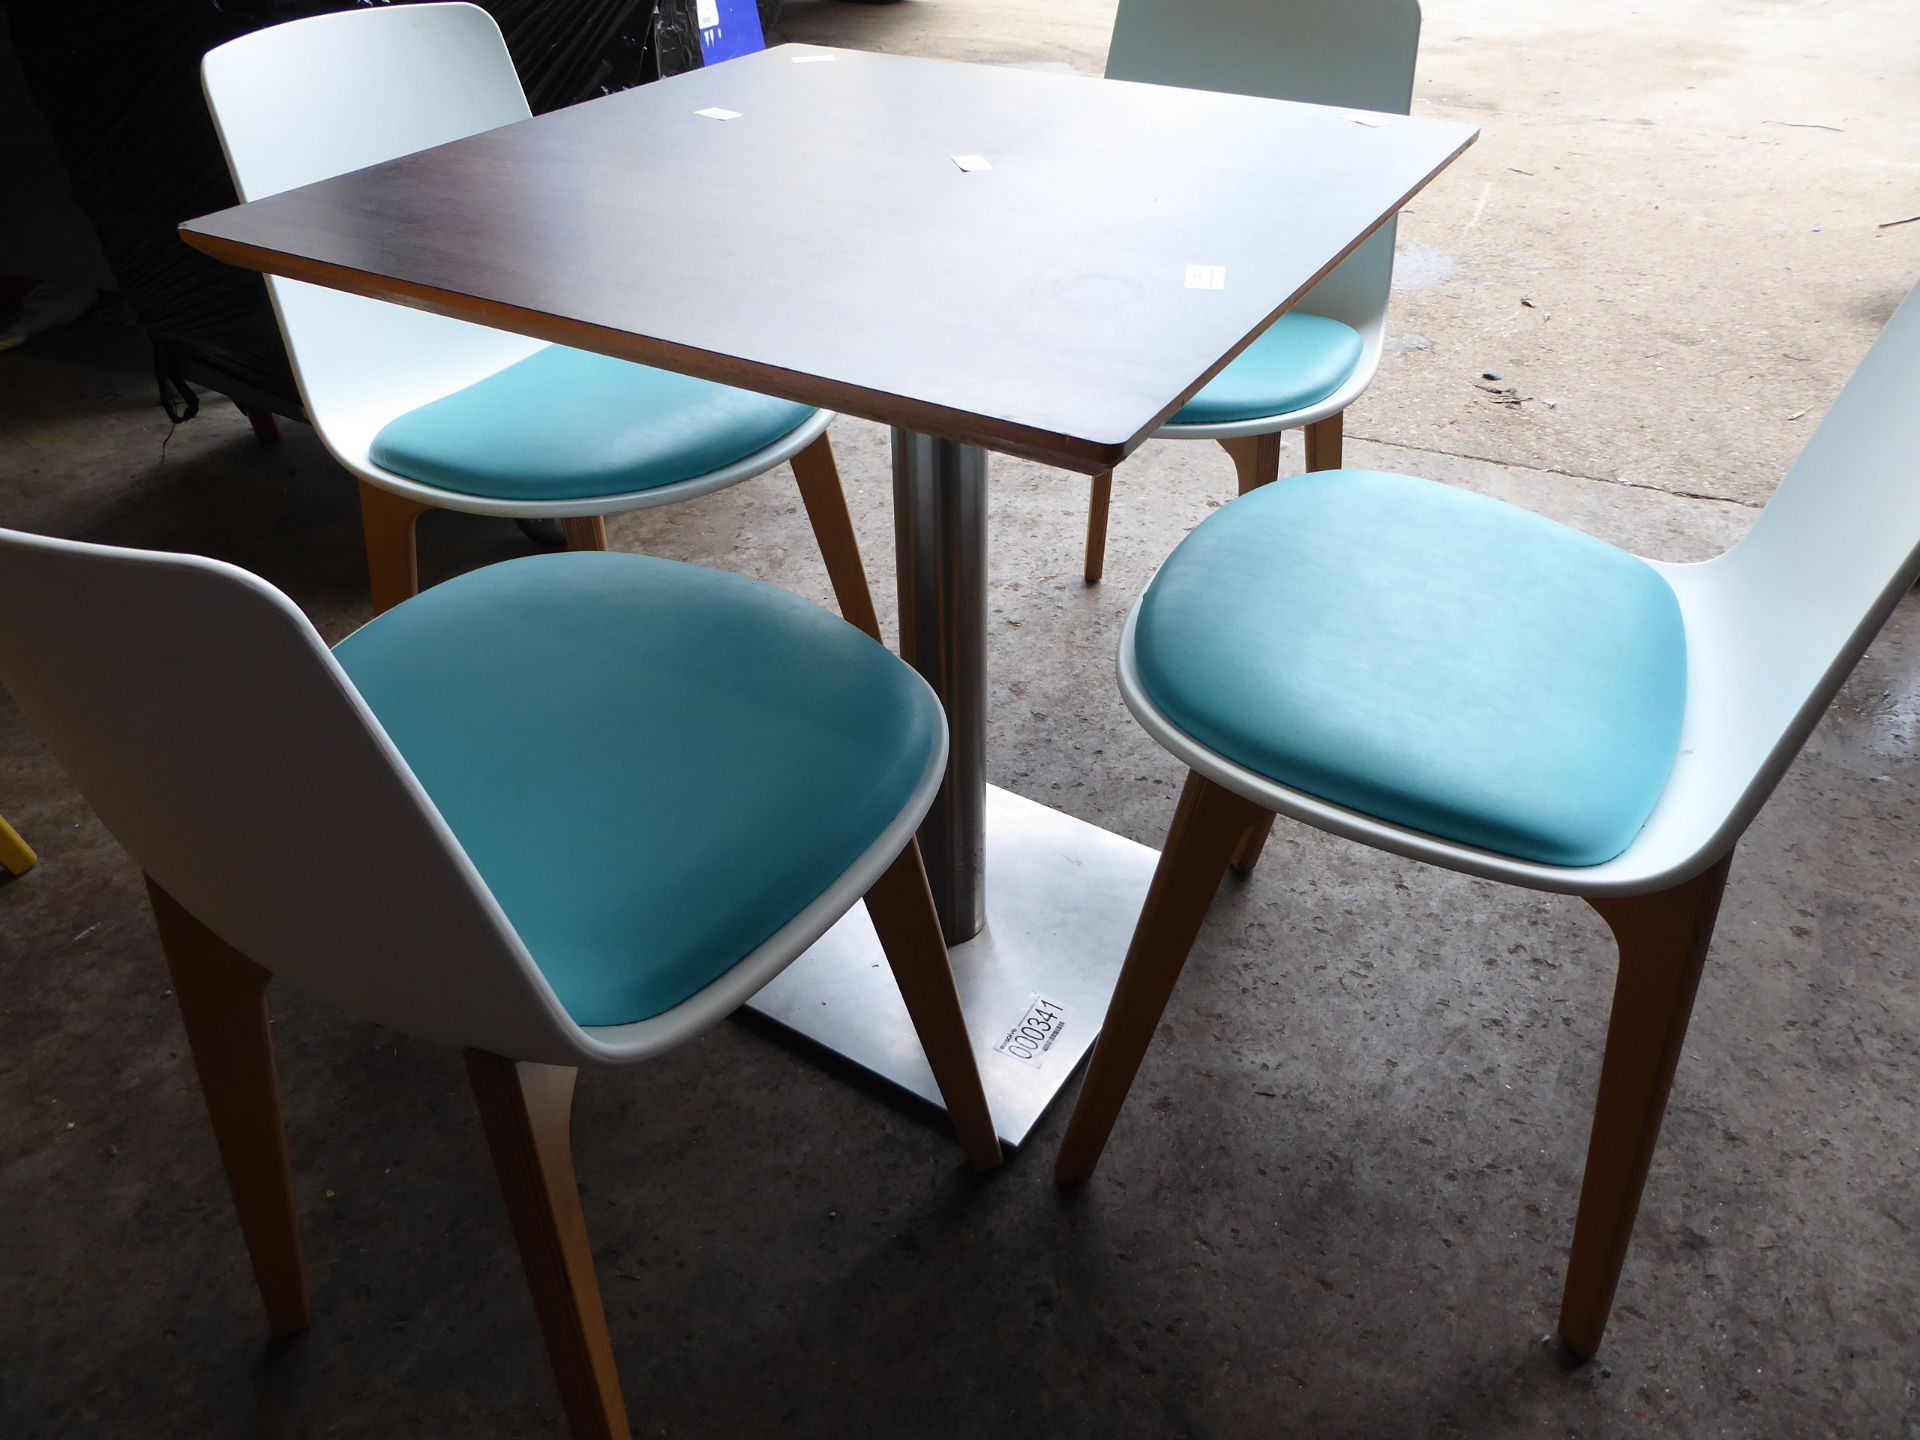 * set of table and 4 chairs - white chairs with turquoise base had and heavy-duty brushed